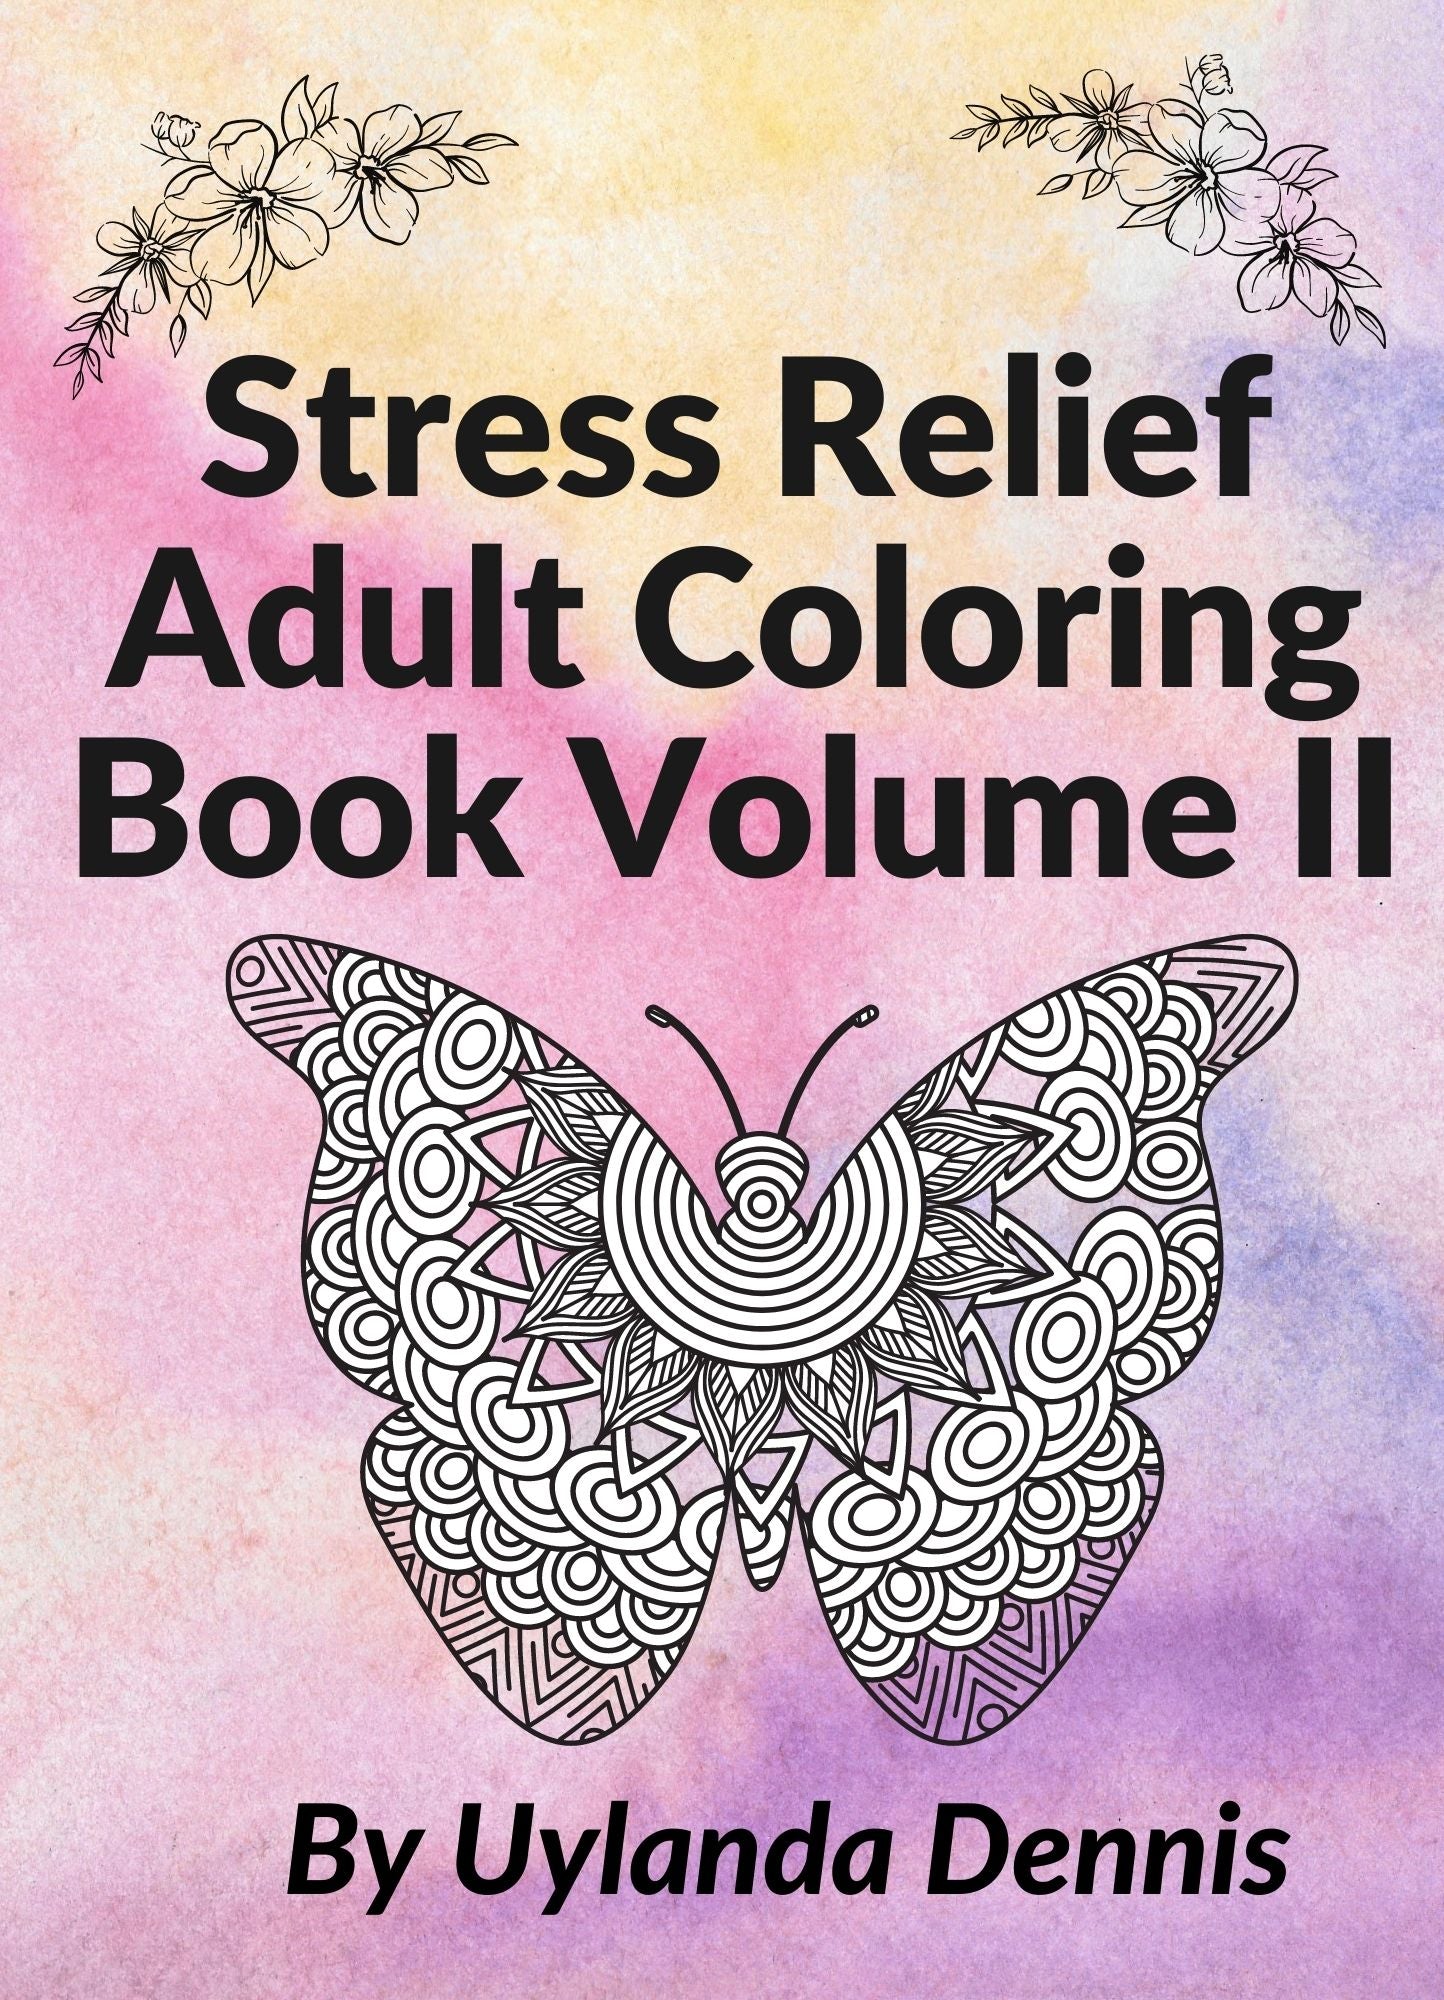 Stress Relief Coloring Book, Louisville KY